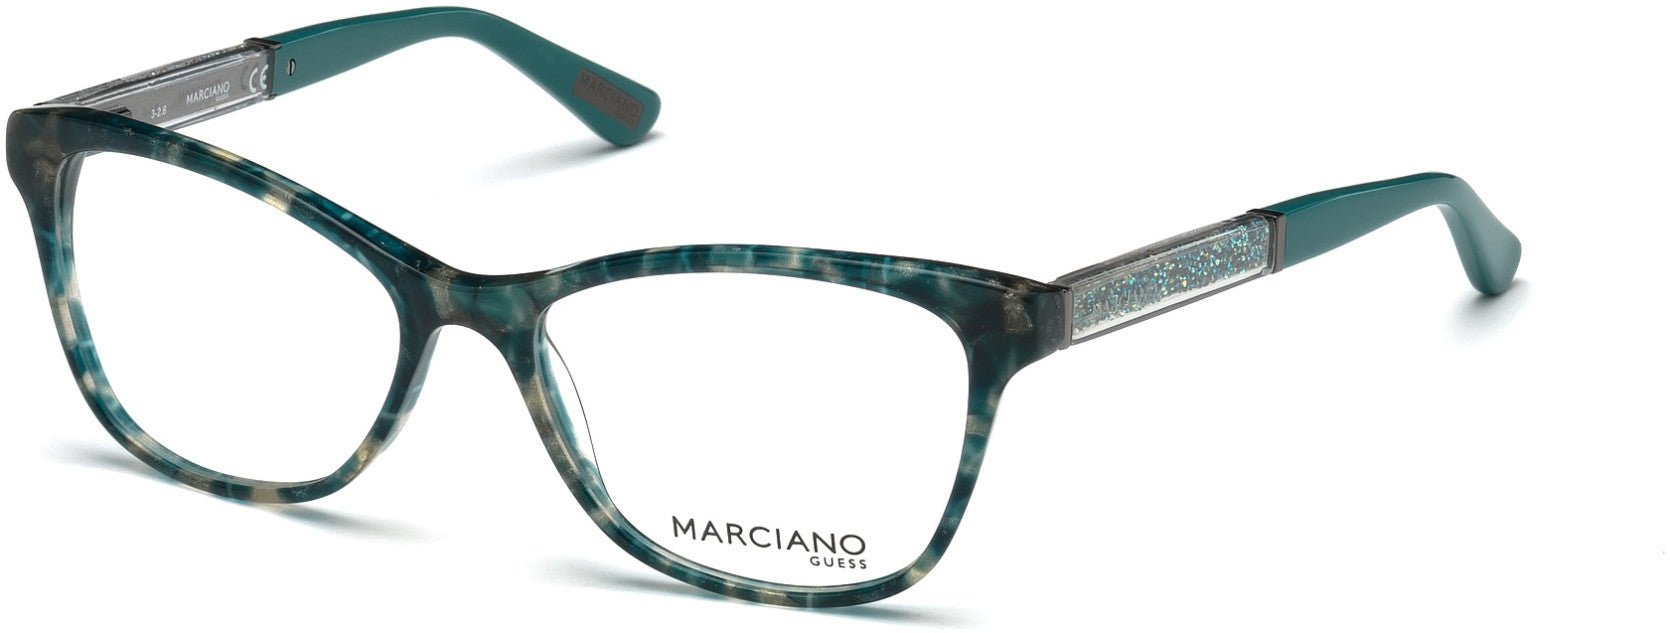 Guess By Marciano GM0313 Geometric Eyeglasses 089-089 - Turquoise